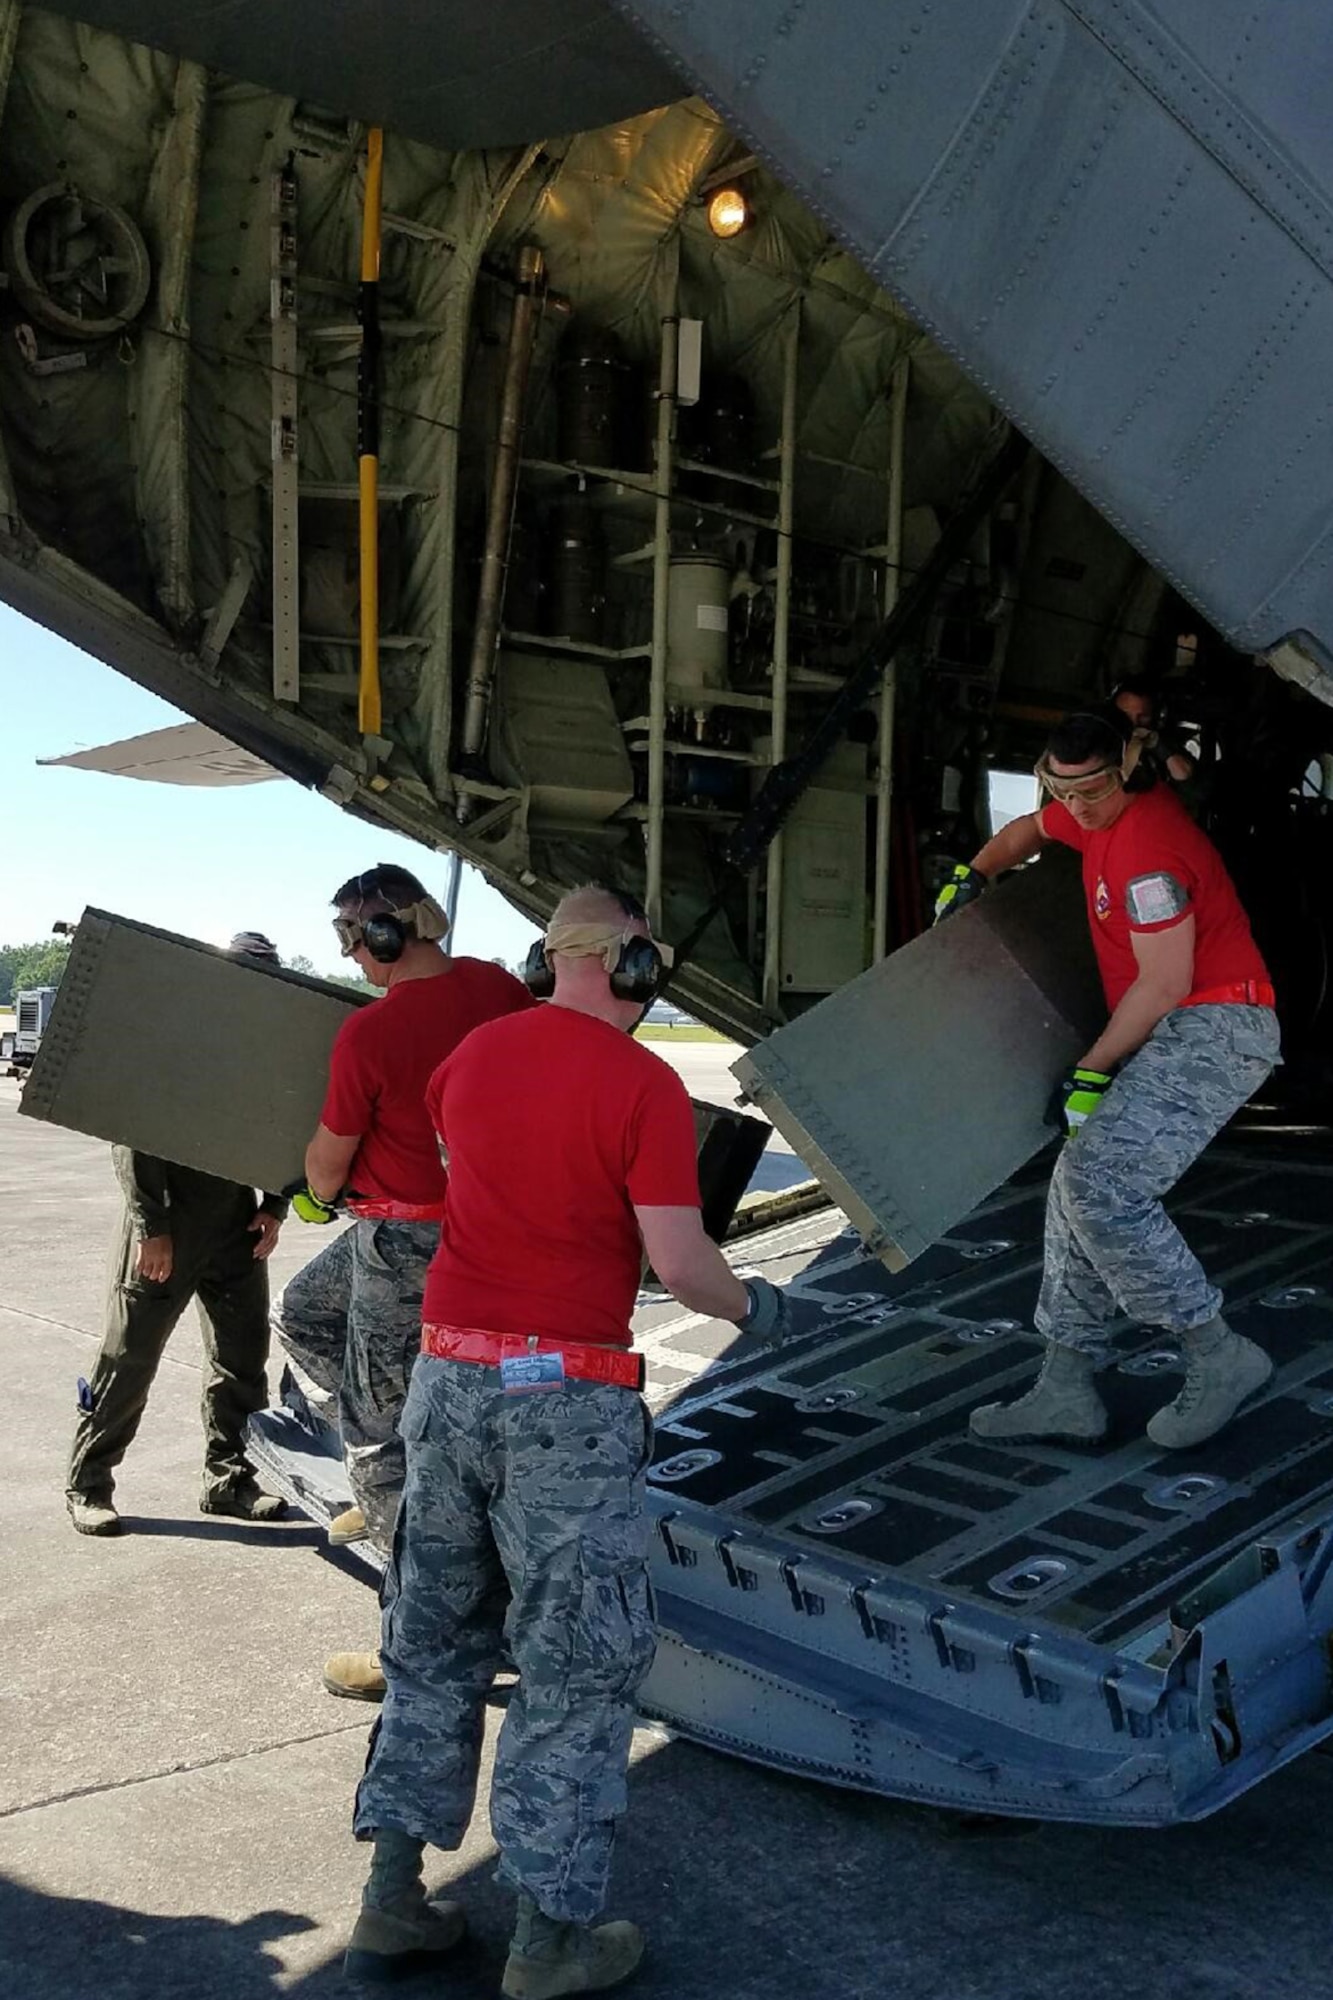 U.S. Air Force Reserve Airmen from the 96th Aerial Port Squadron, reconfigure a C-130J Super Hercules to load a Humvee for an Engines Running On-Load/Odd-Load (ERO) event during the 2017 Air Force Reserve Command Port Dawg Challenge April 26, 2017, at Dobbins Air Reserve Base, Ga.  The three day competition pitted 23 aerial port teams against each other in 12 different events, which were designed to foster communication, leadership, professionalism and camaraderie between the participants. (U.S. Air Force photo by Chief Master Sgt. Cynthia Underwood/Released)